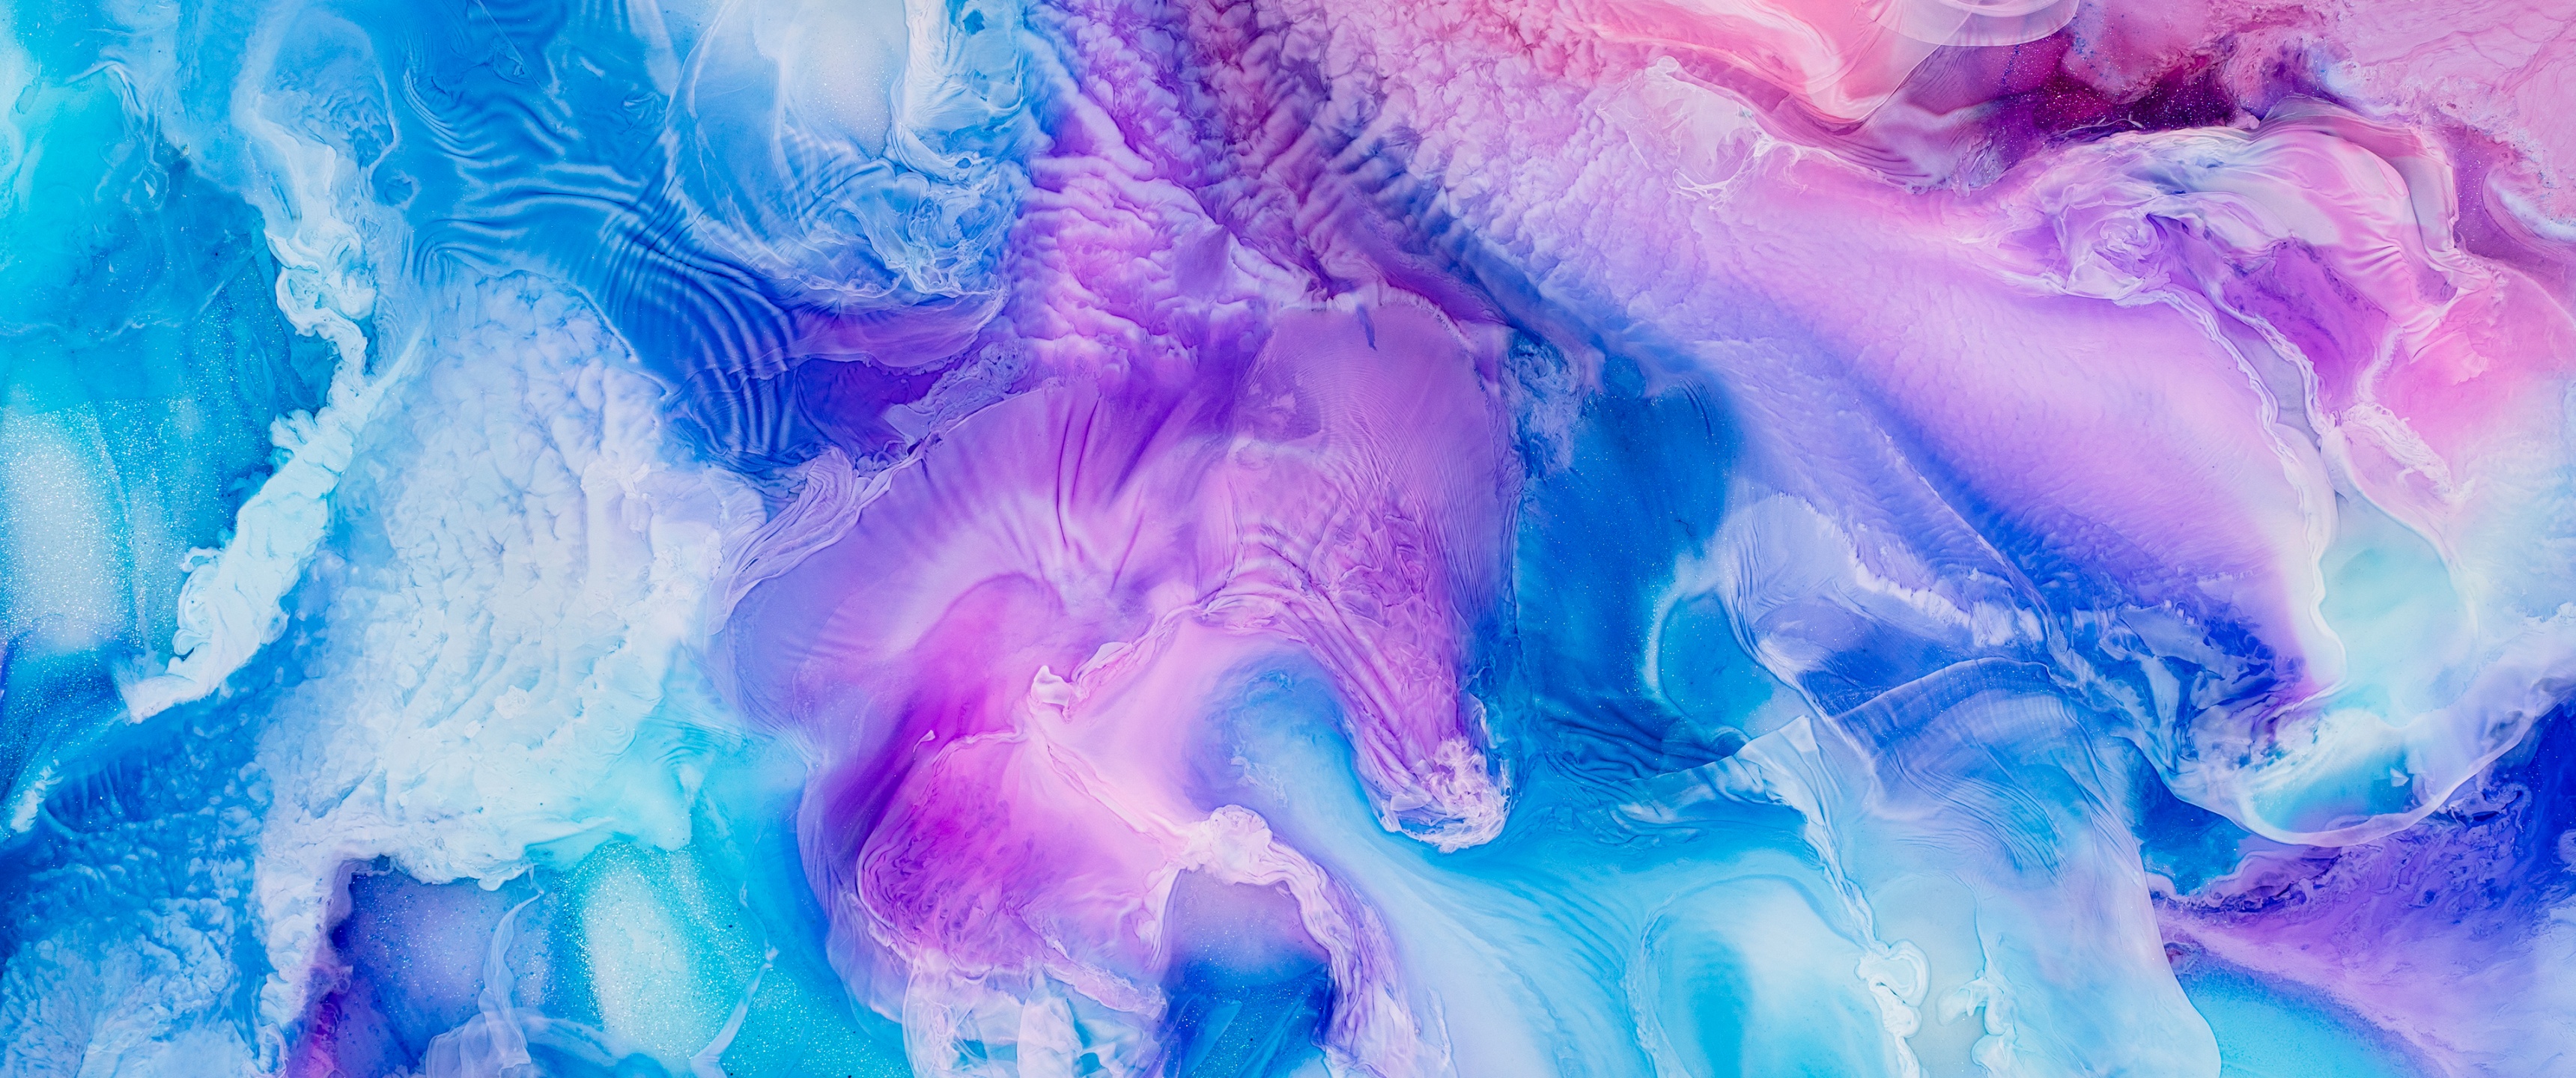 Liquid art Wallpaper 4K, Pearl ink, Colorful, Abstract, #1298